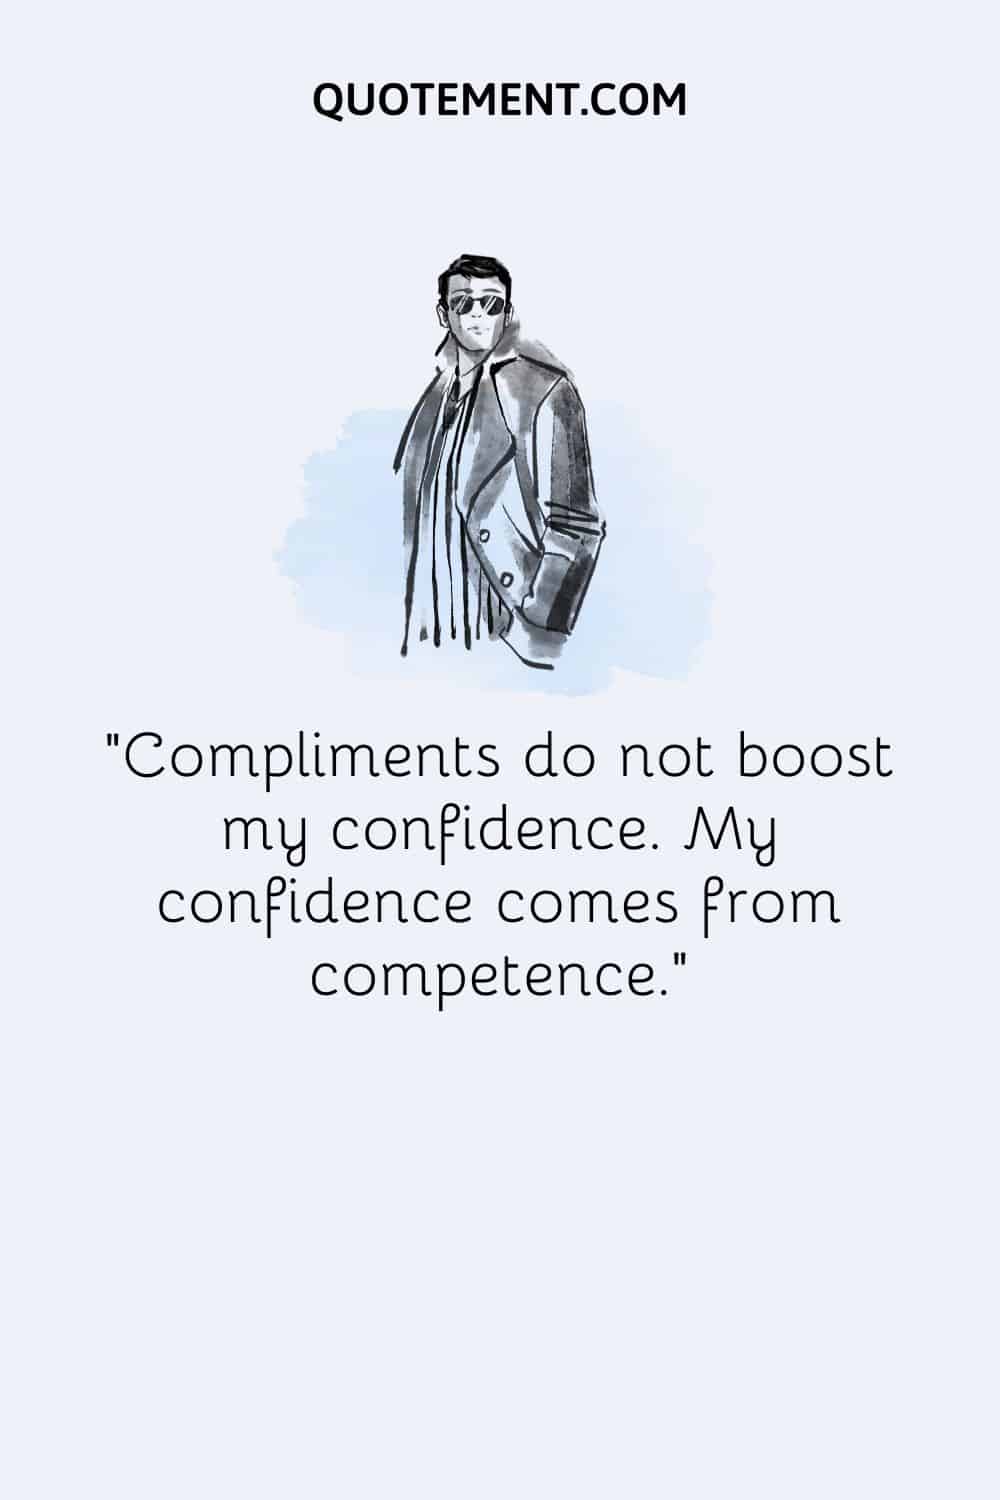 Compliments do not boost my confidence